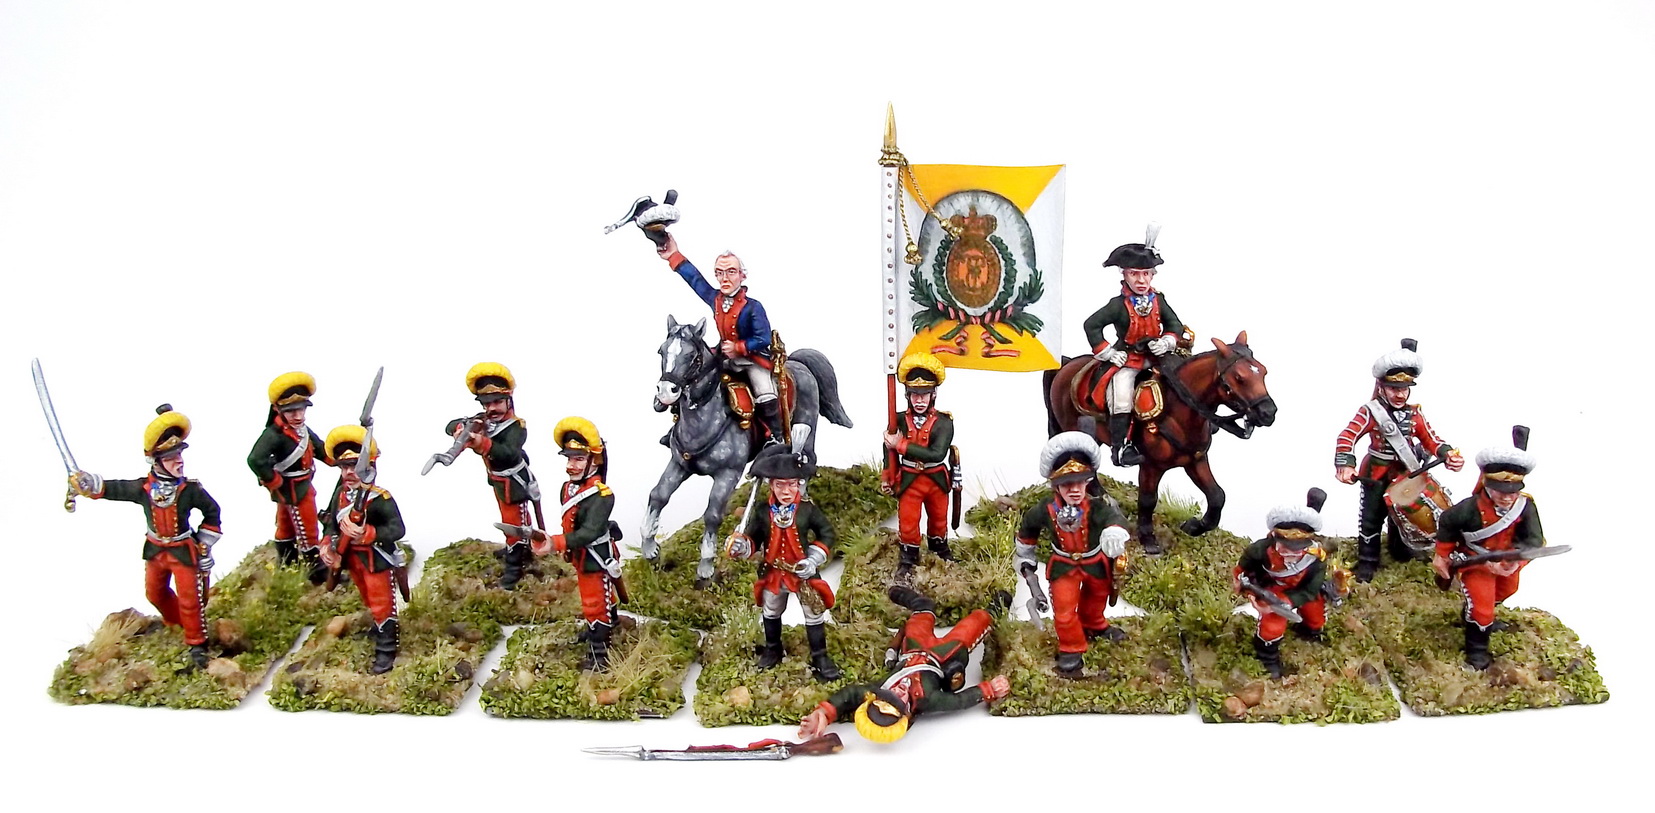 Figures: A.V.Suvorov and his bogatyrs, photo #37